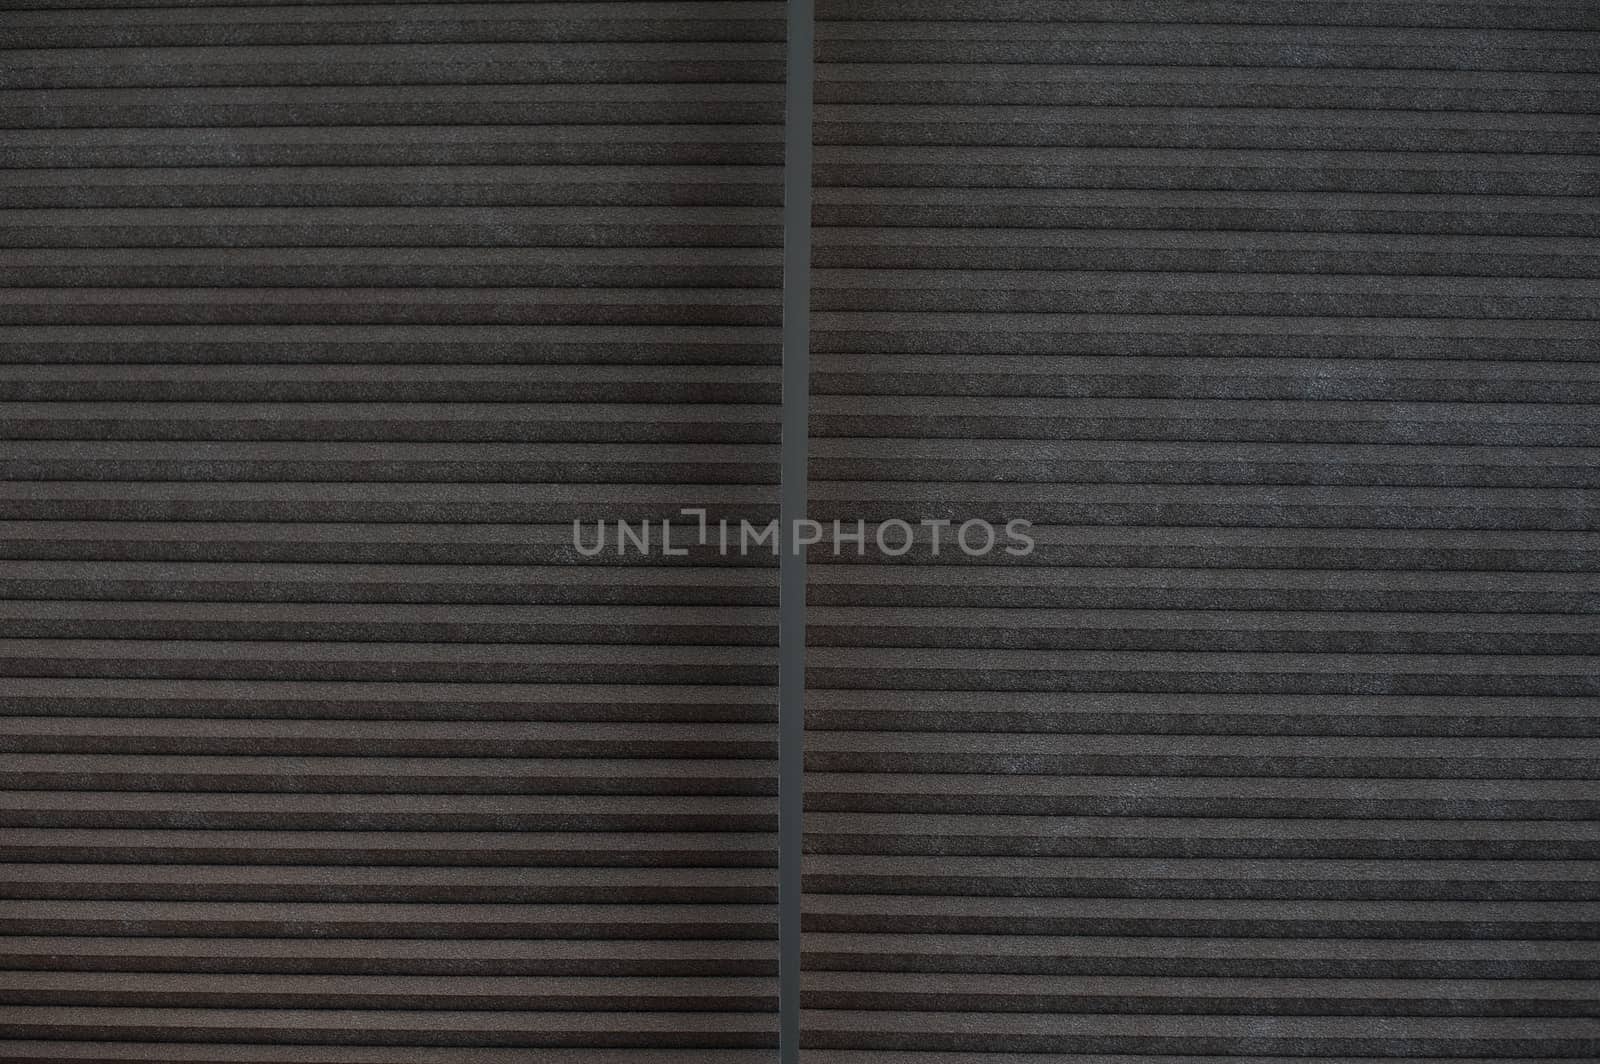 Texture of brown shutters on window in office by timonko